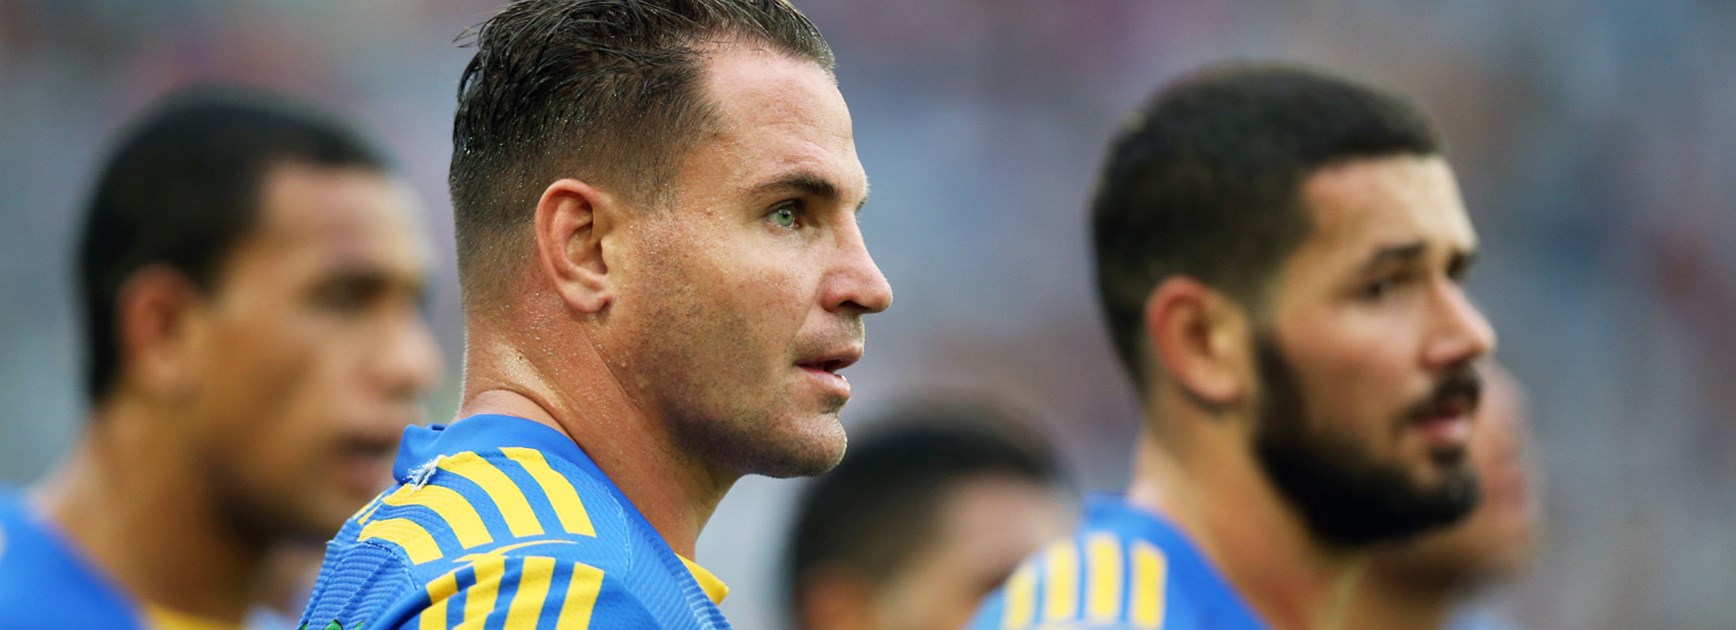 Anthony Watmough said he was ready to retire in 2015 due to injury.